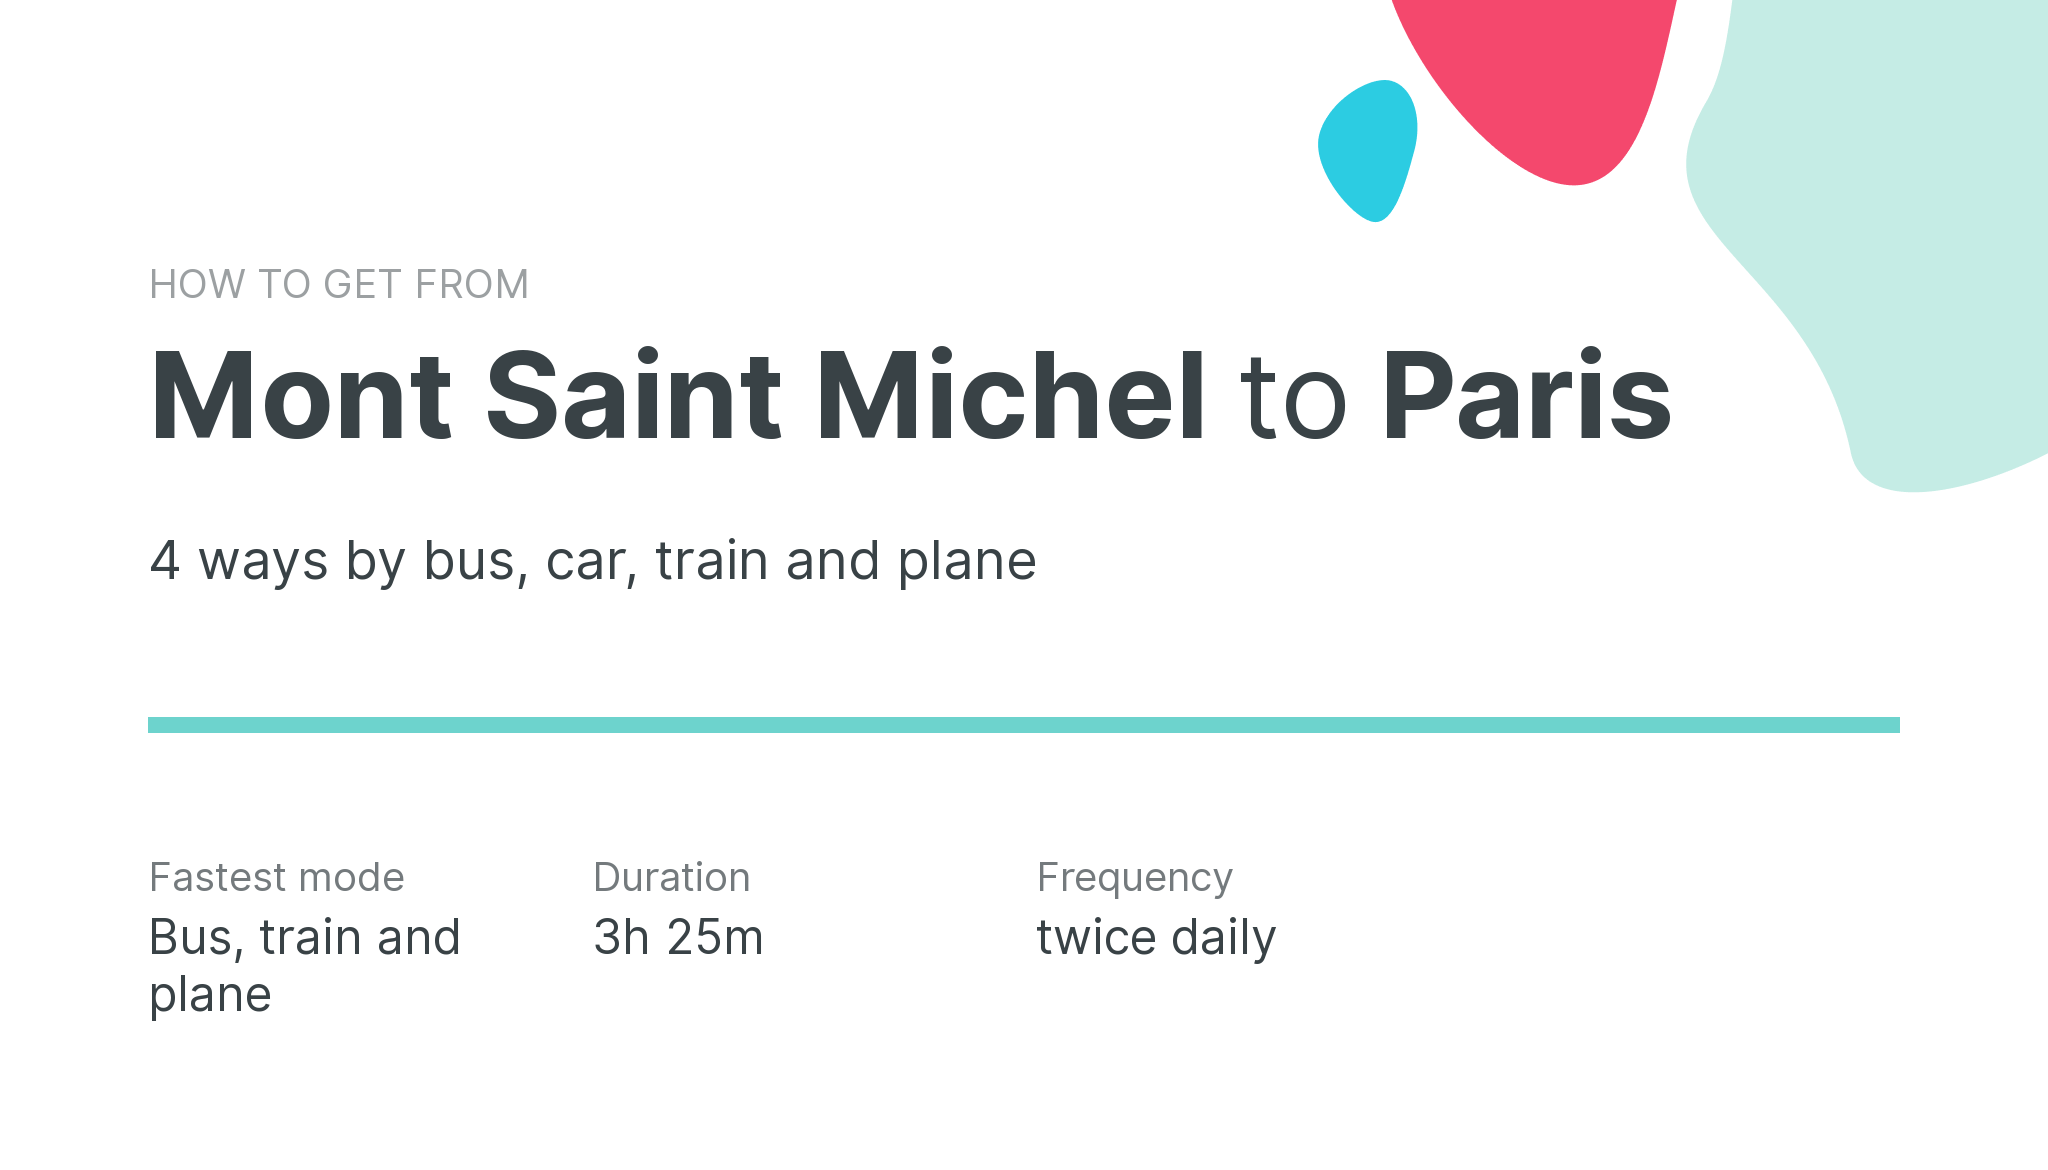 How do I get from Mont Saint Michel to Paris